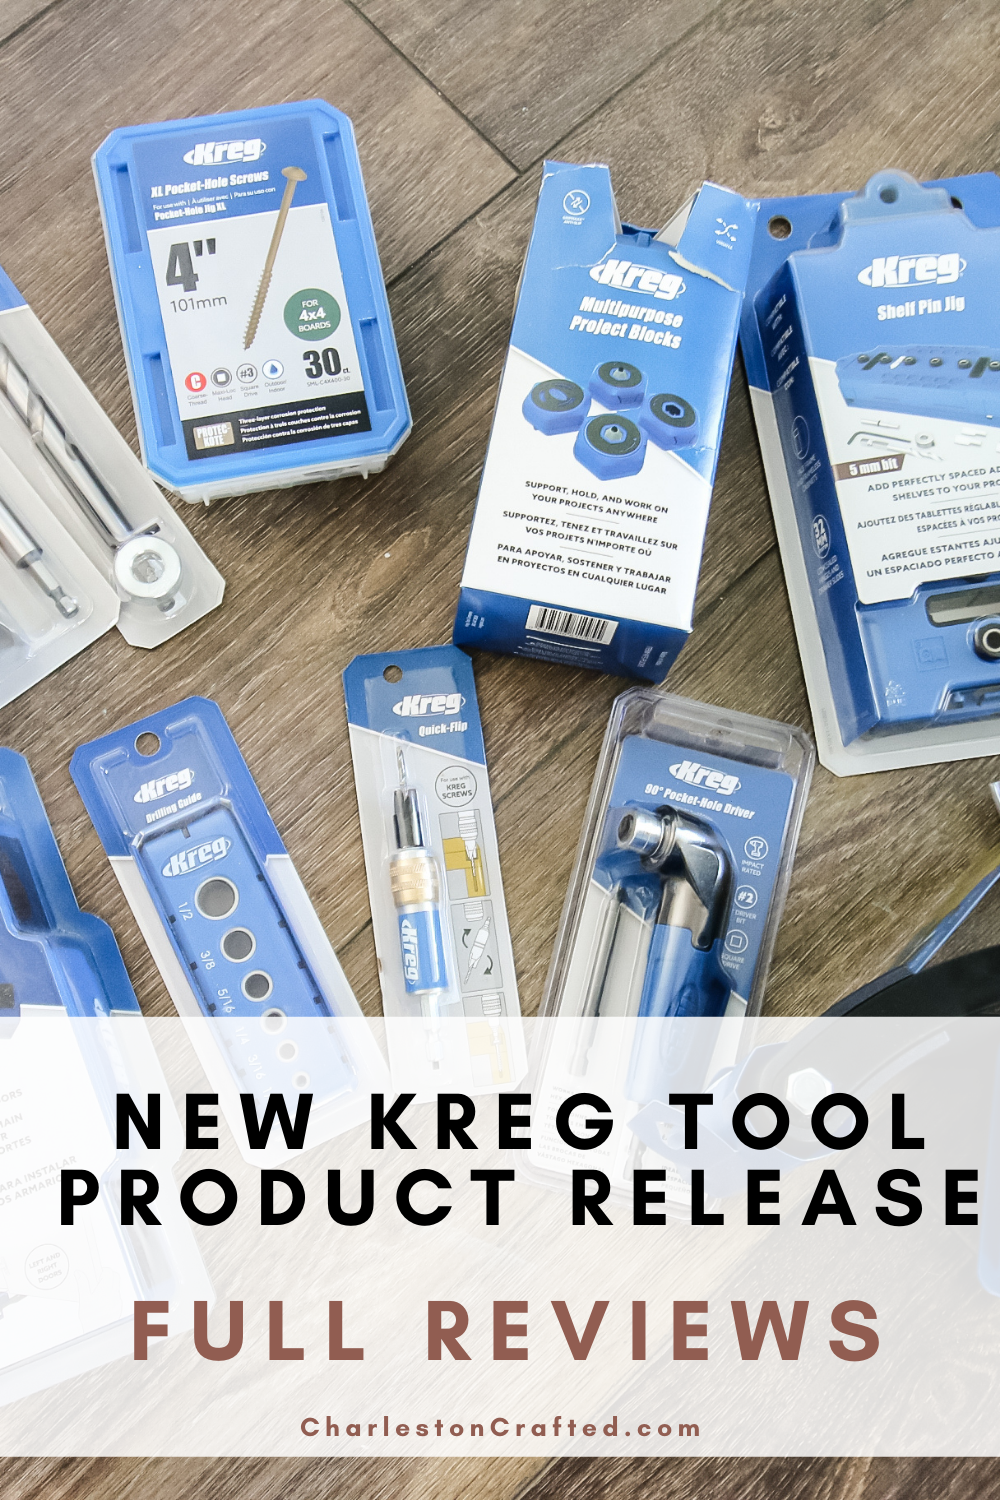 https://www.charlestoncrafted.com/wp-content/uploads/2022/03/Kreg-March-product-release.png